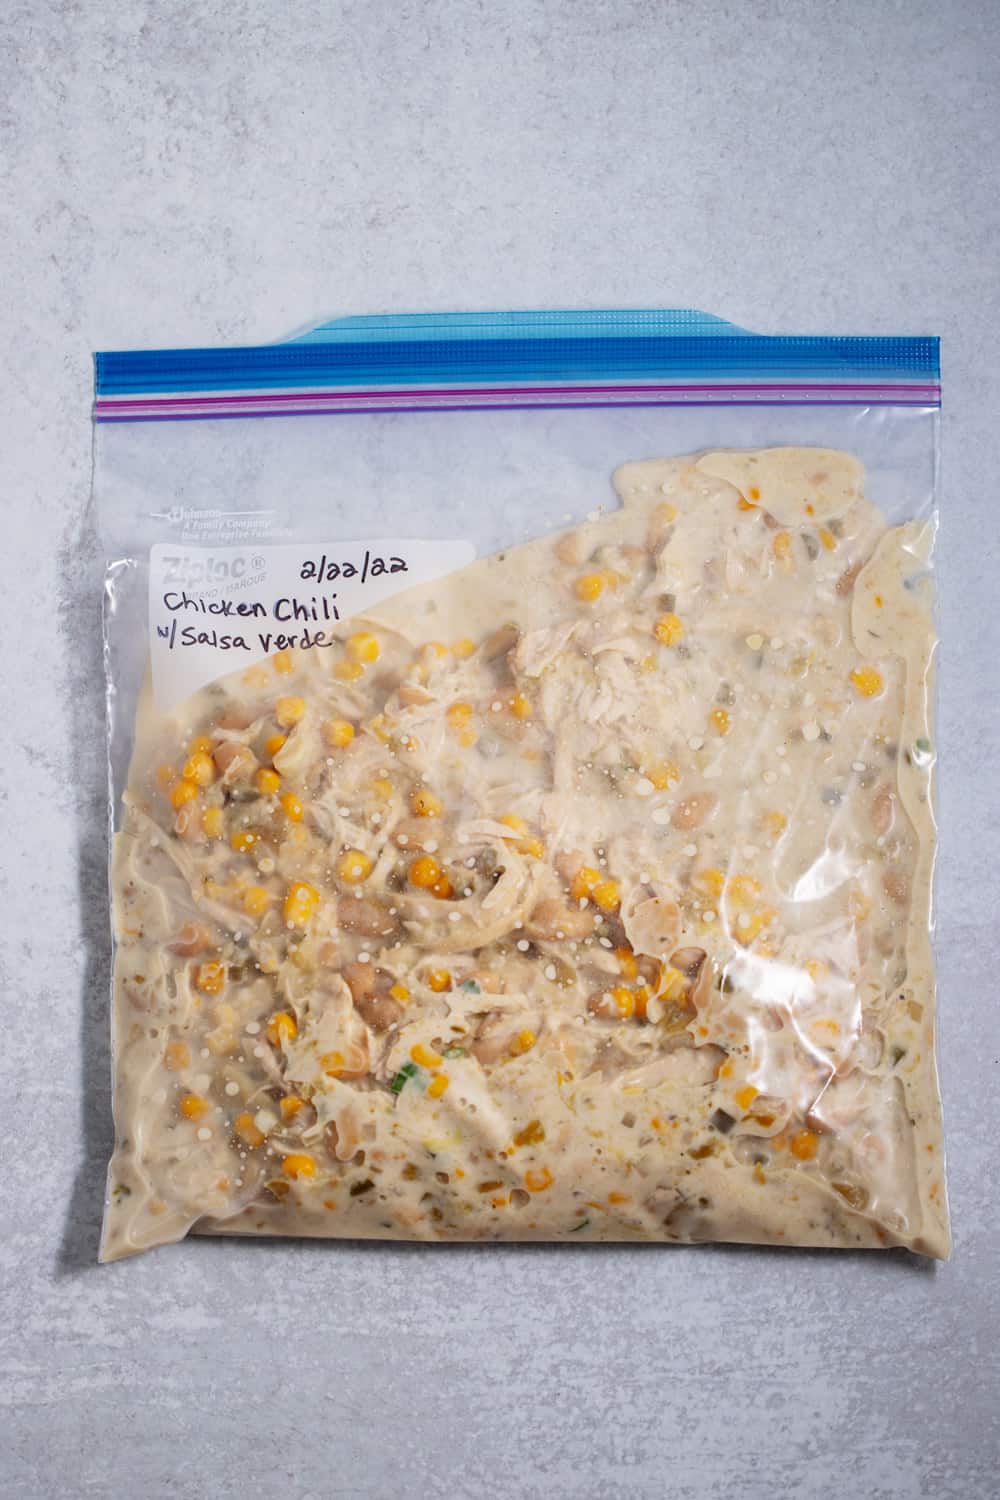 leftover chicken chili with salsa verde recipe in a freezer bag